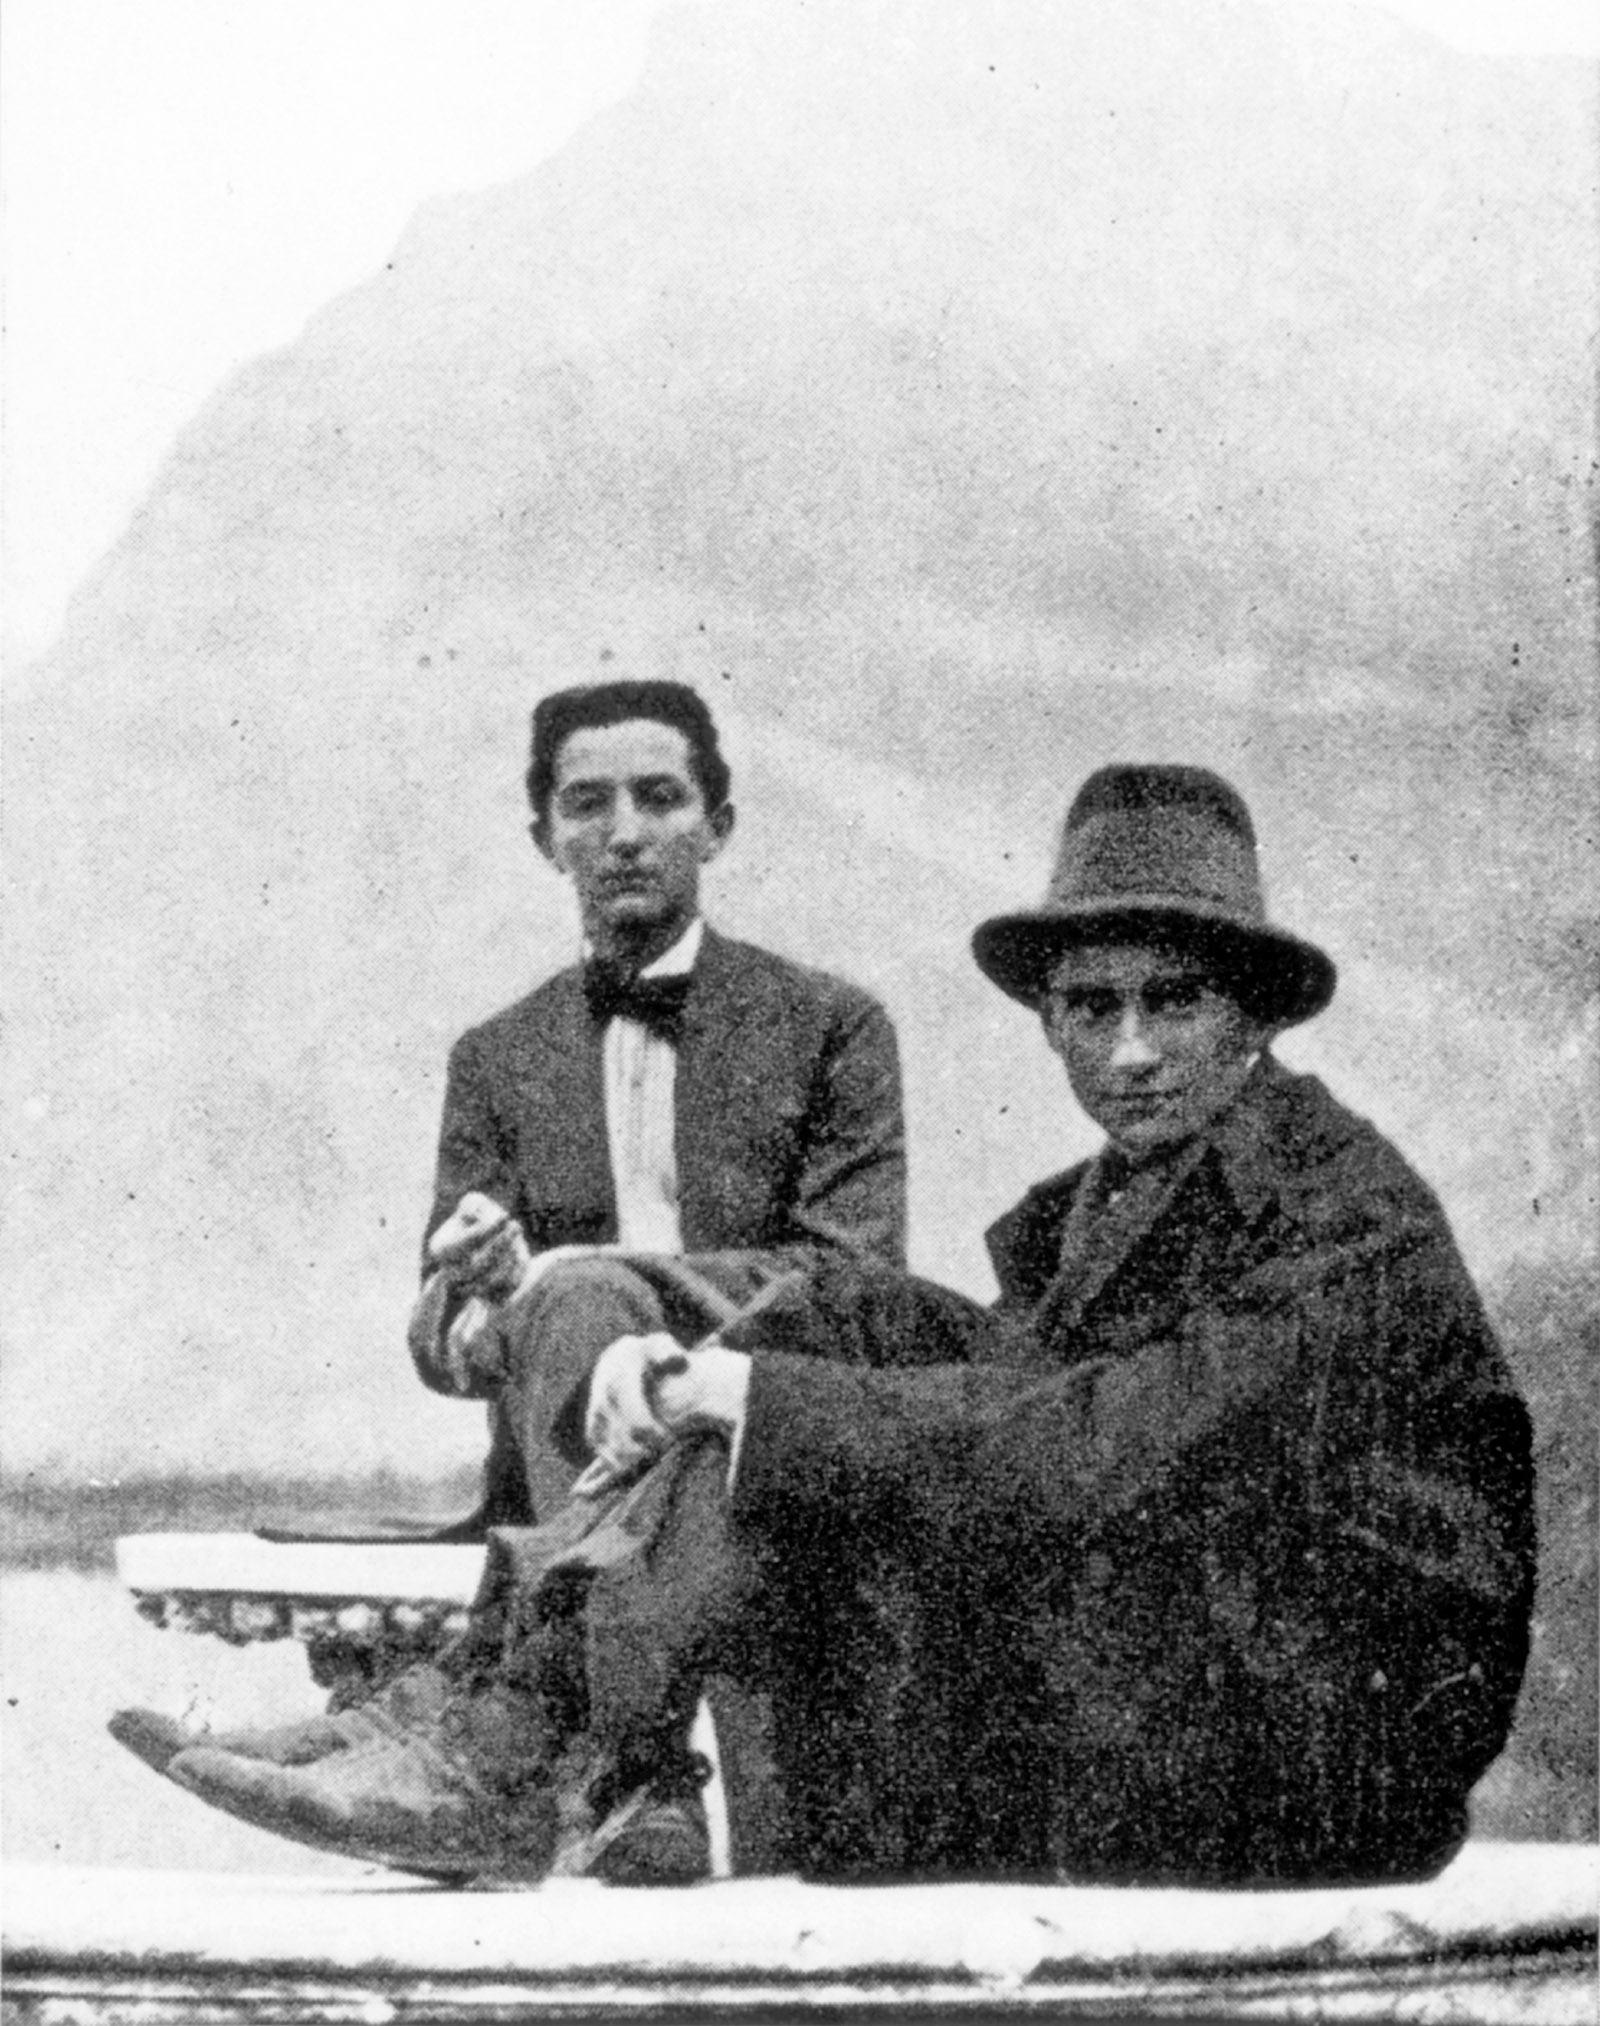 Franz Kafka (right) with Max Brod’s younger brother, Otto, at the Castel Toblino near Trento, Italy, 1909